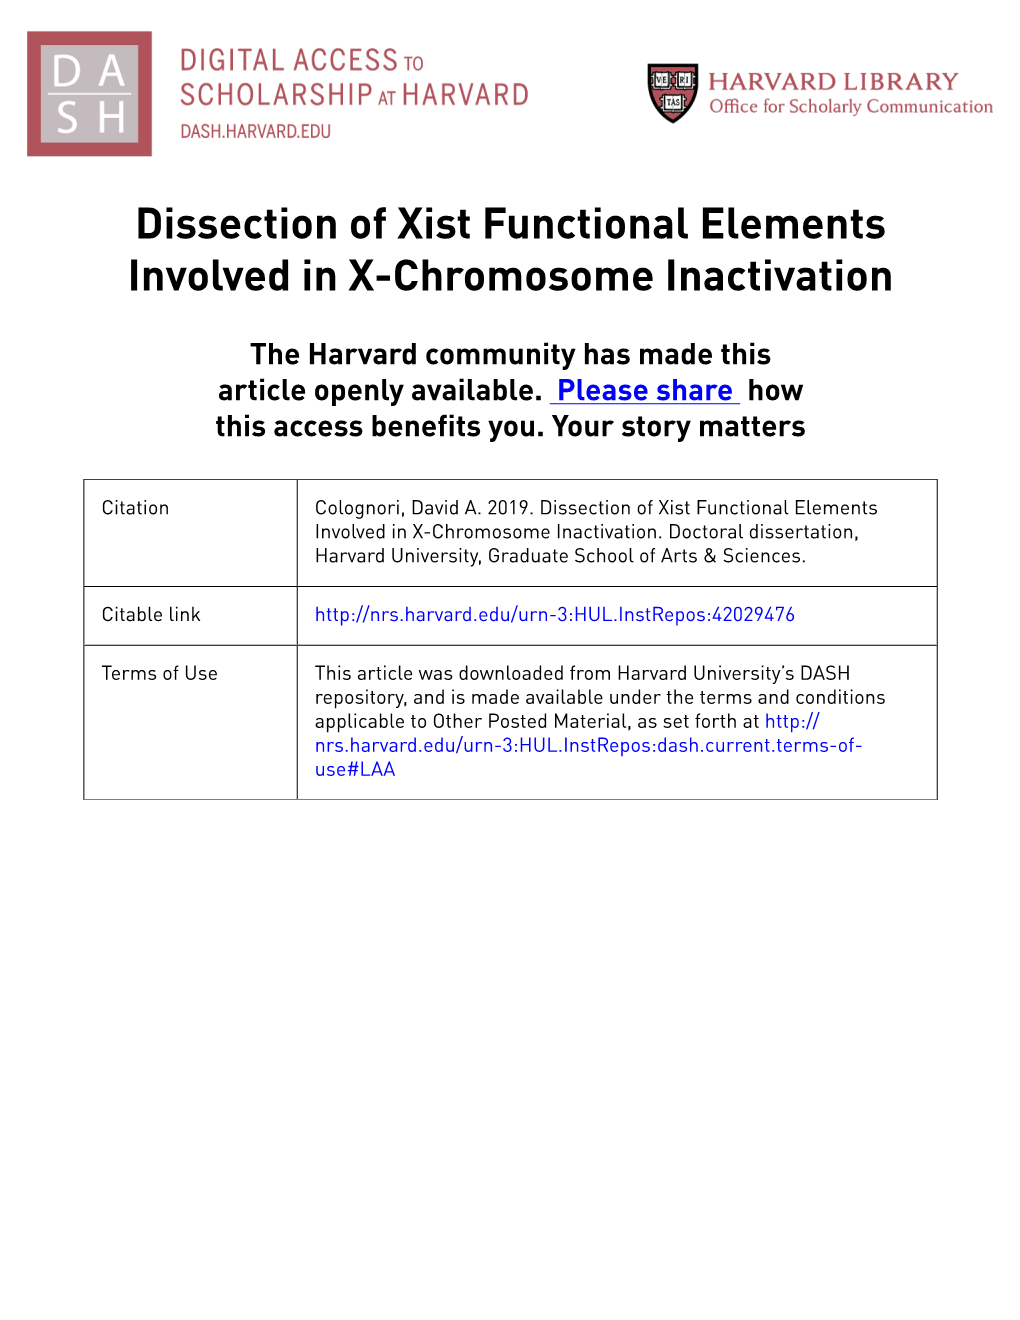 Dissection of Xist Functional Elements Involved in X-Chromosome Inactivation